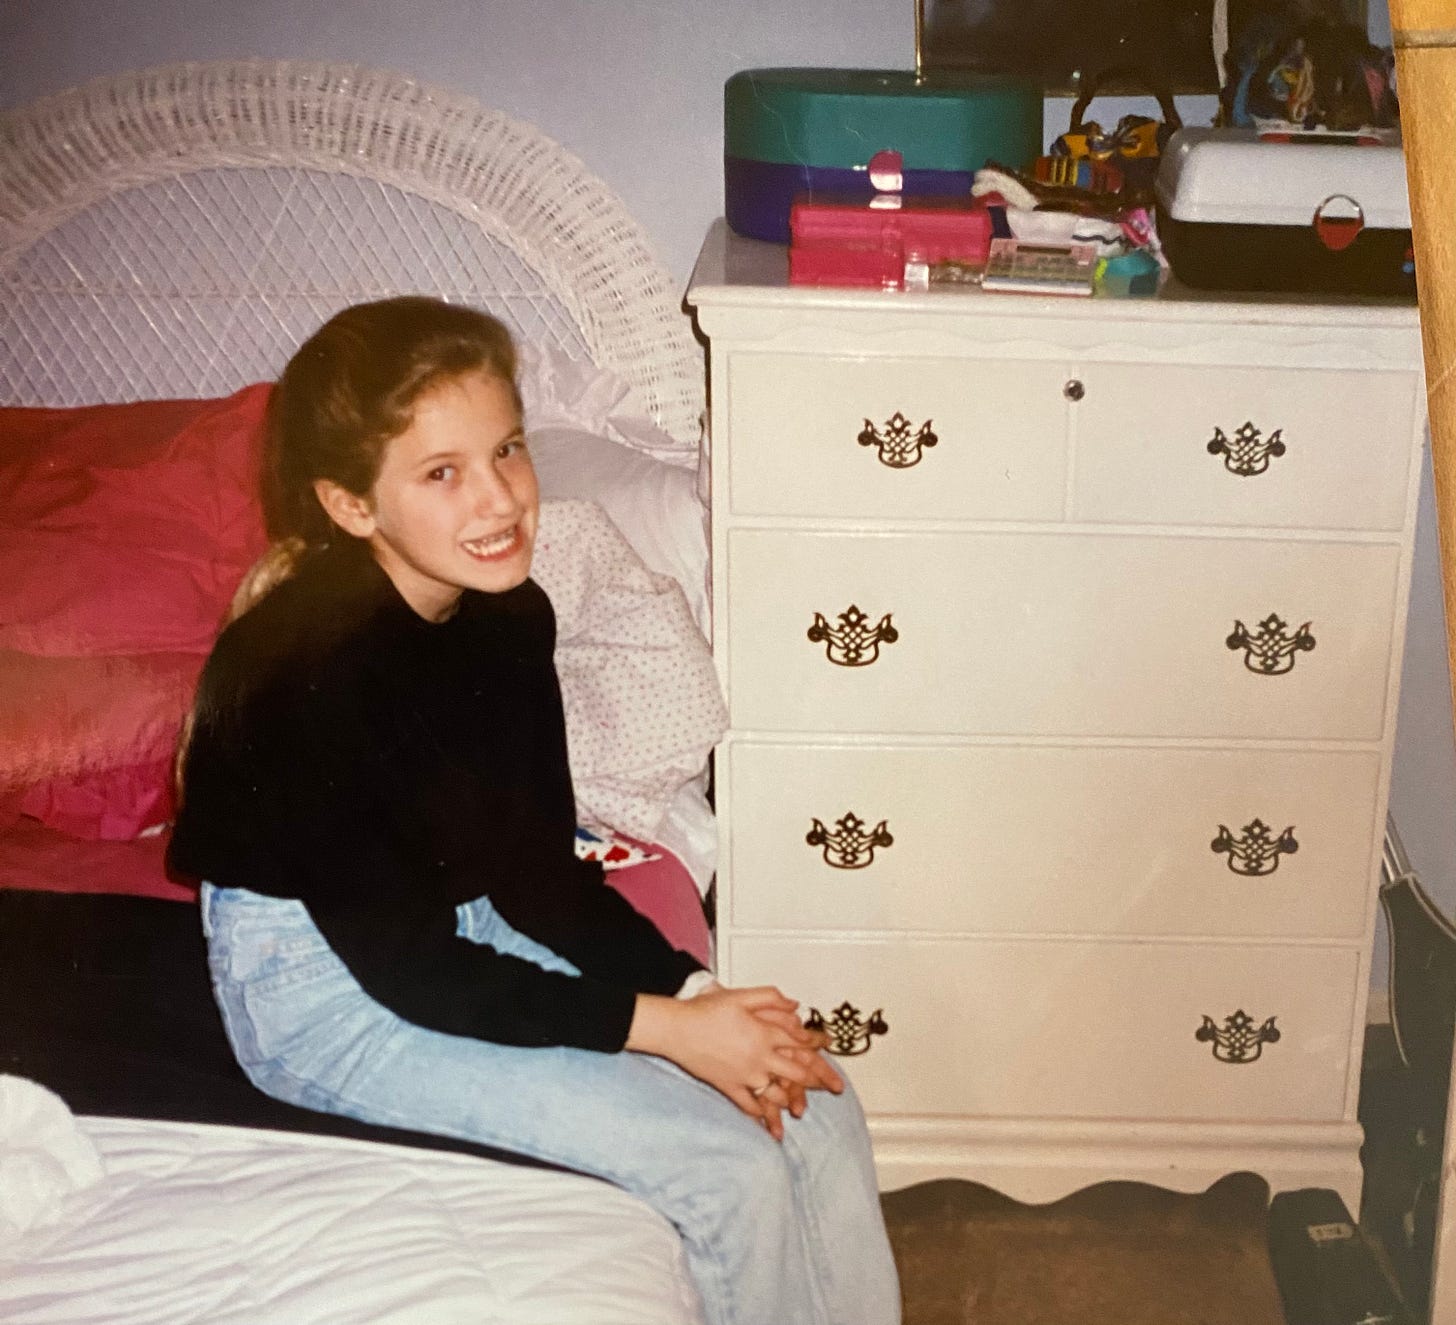 Eight year old girl smiling with braces, next to a white dresser.